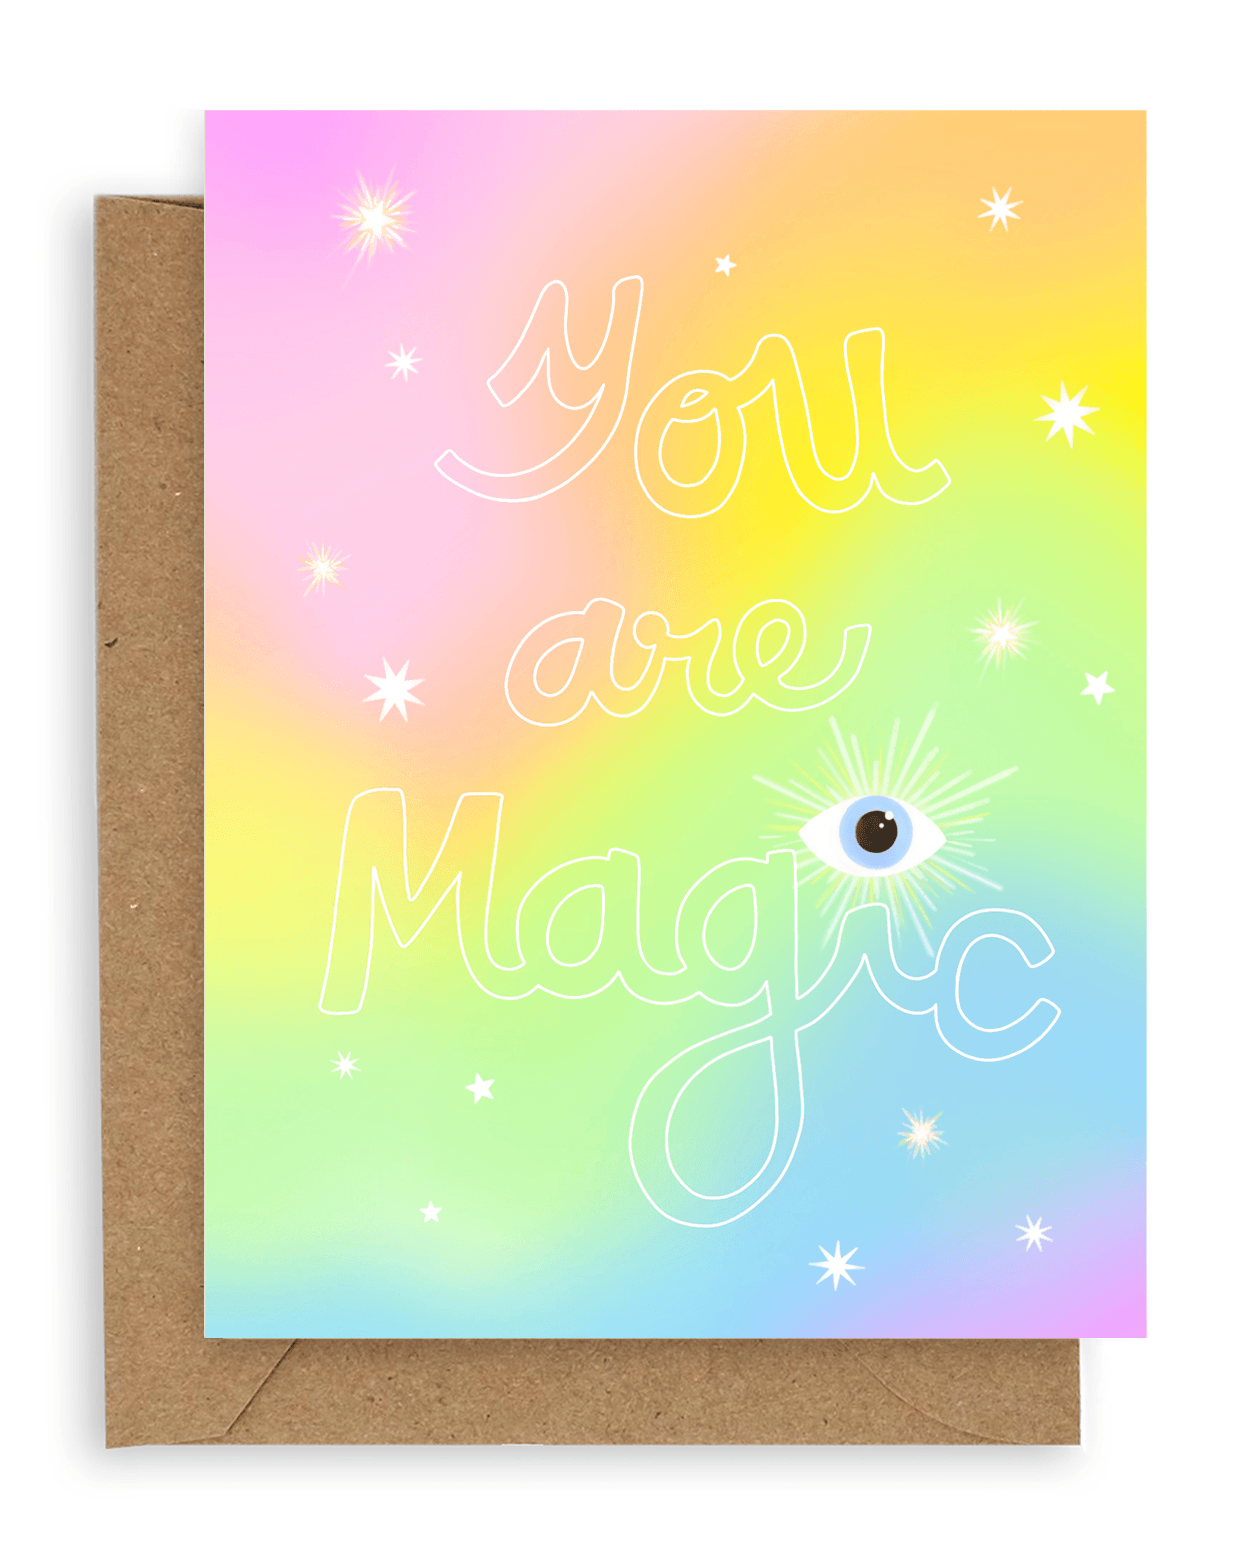 The words &quot;You are magic&quot; in hollow white font with stars and a neon icon eye above the &quot;i&quot; in magic, printed on a gradient pink, yellow, blue, green and purple background. Shown with kraft envelope.